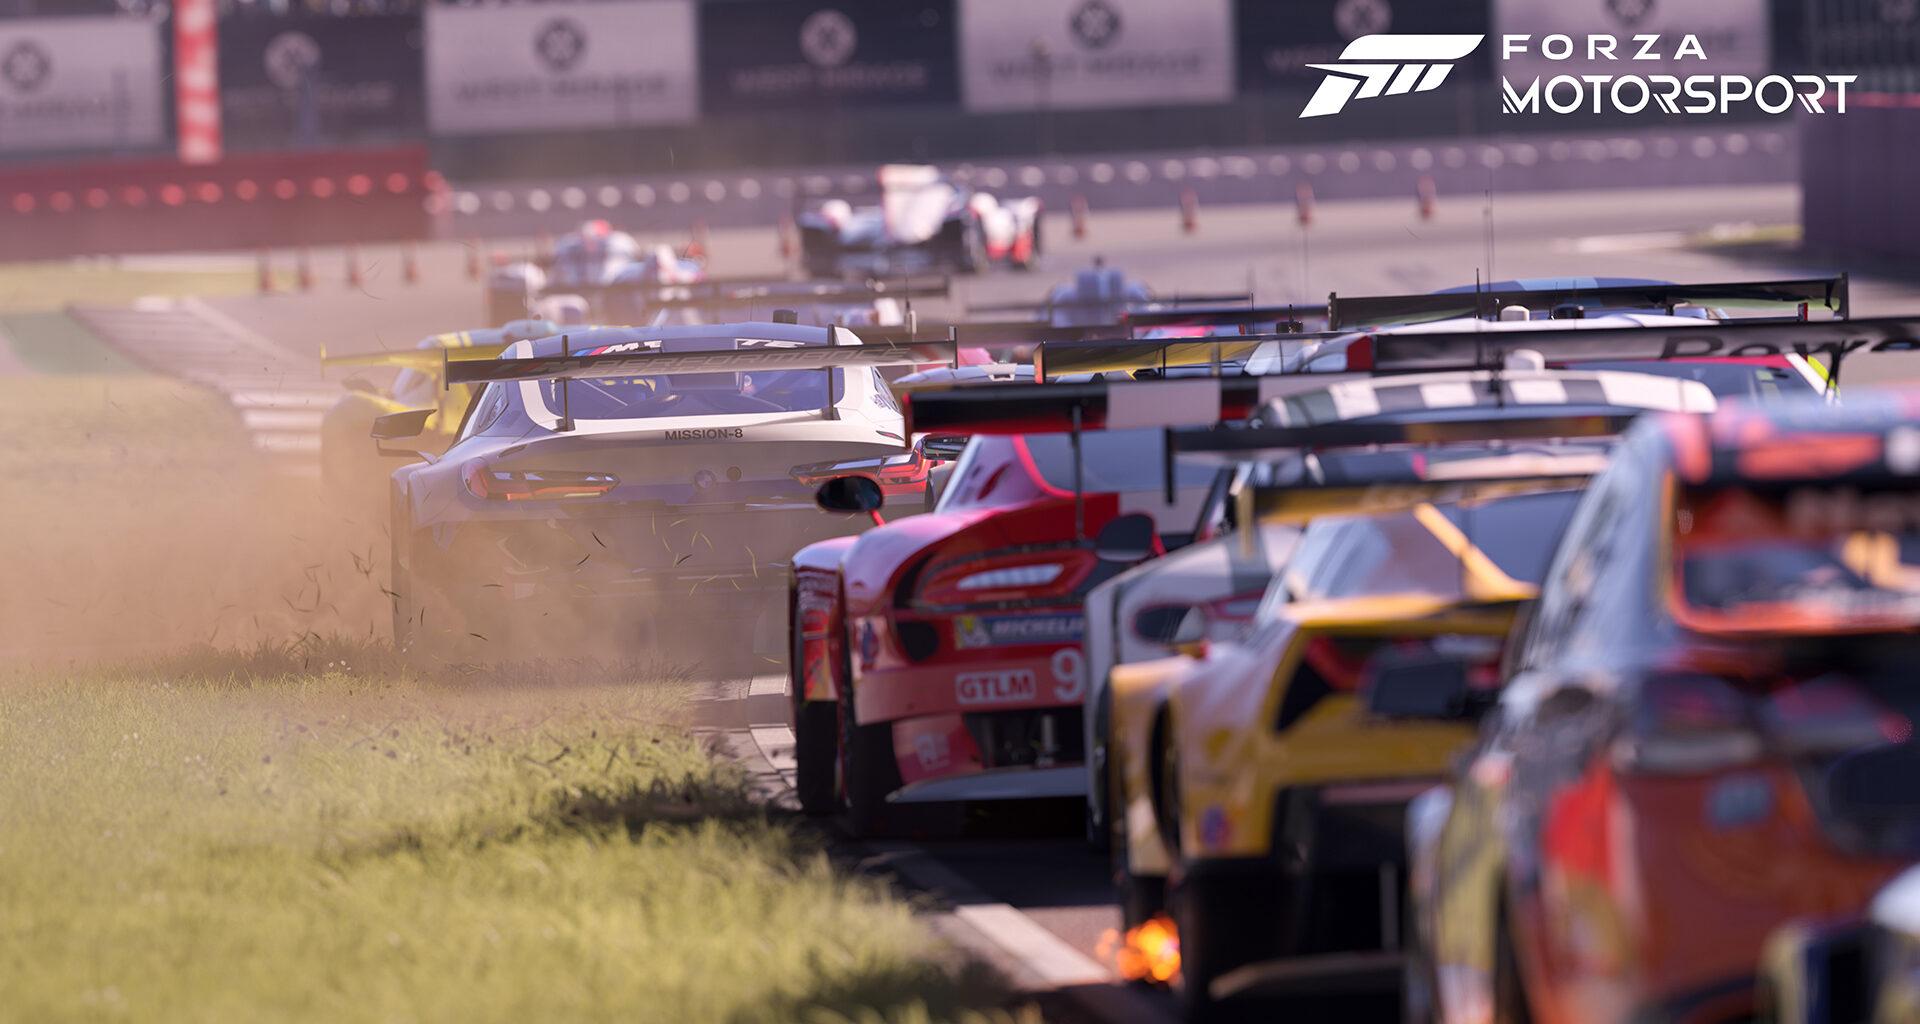 What you need to know about Forza Motorsport's career mode, Builders Cup